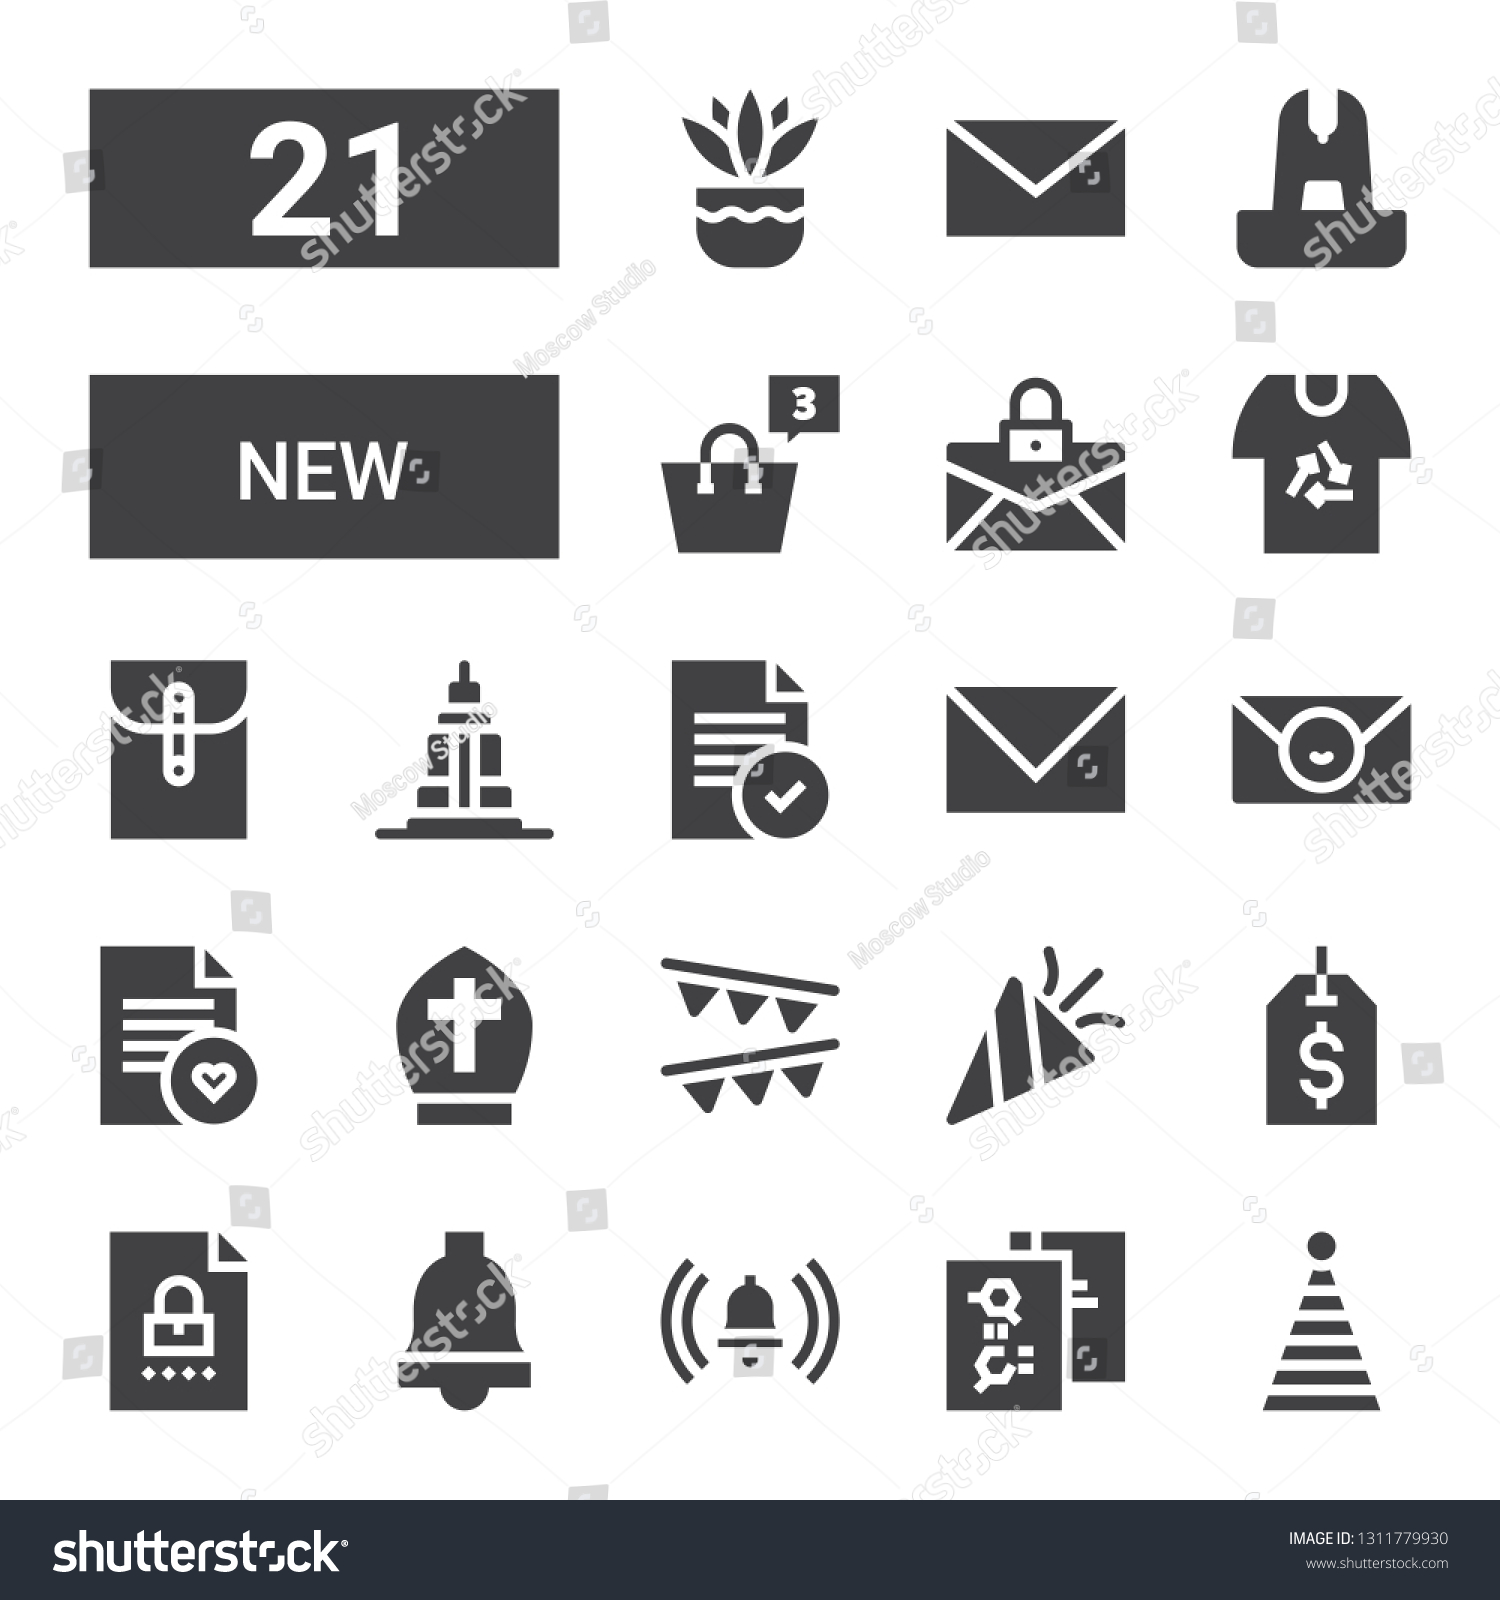 SVG of new icon set. Collection of 21 filled new icons included Party hat, File, Notification, Label, Confetti, Garlands, Pope, Email, Empire state, Mail, Shirt, Shopping bag, Fountain svg